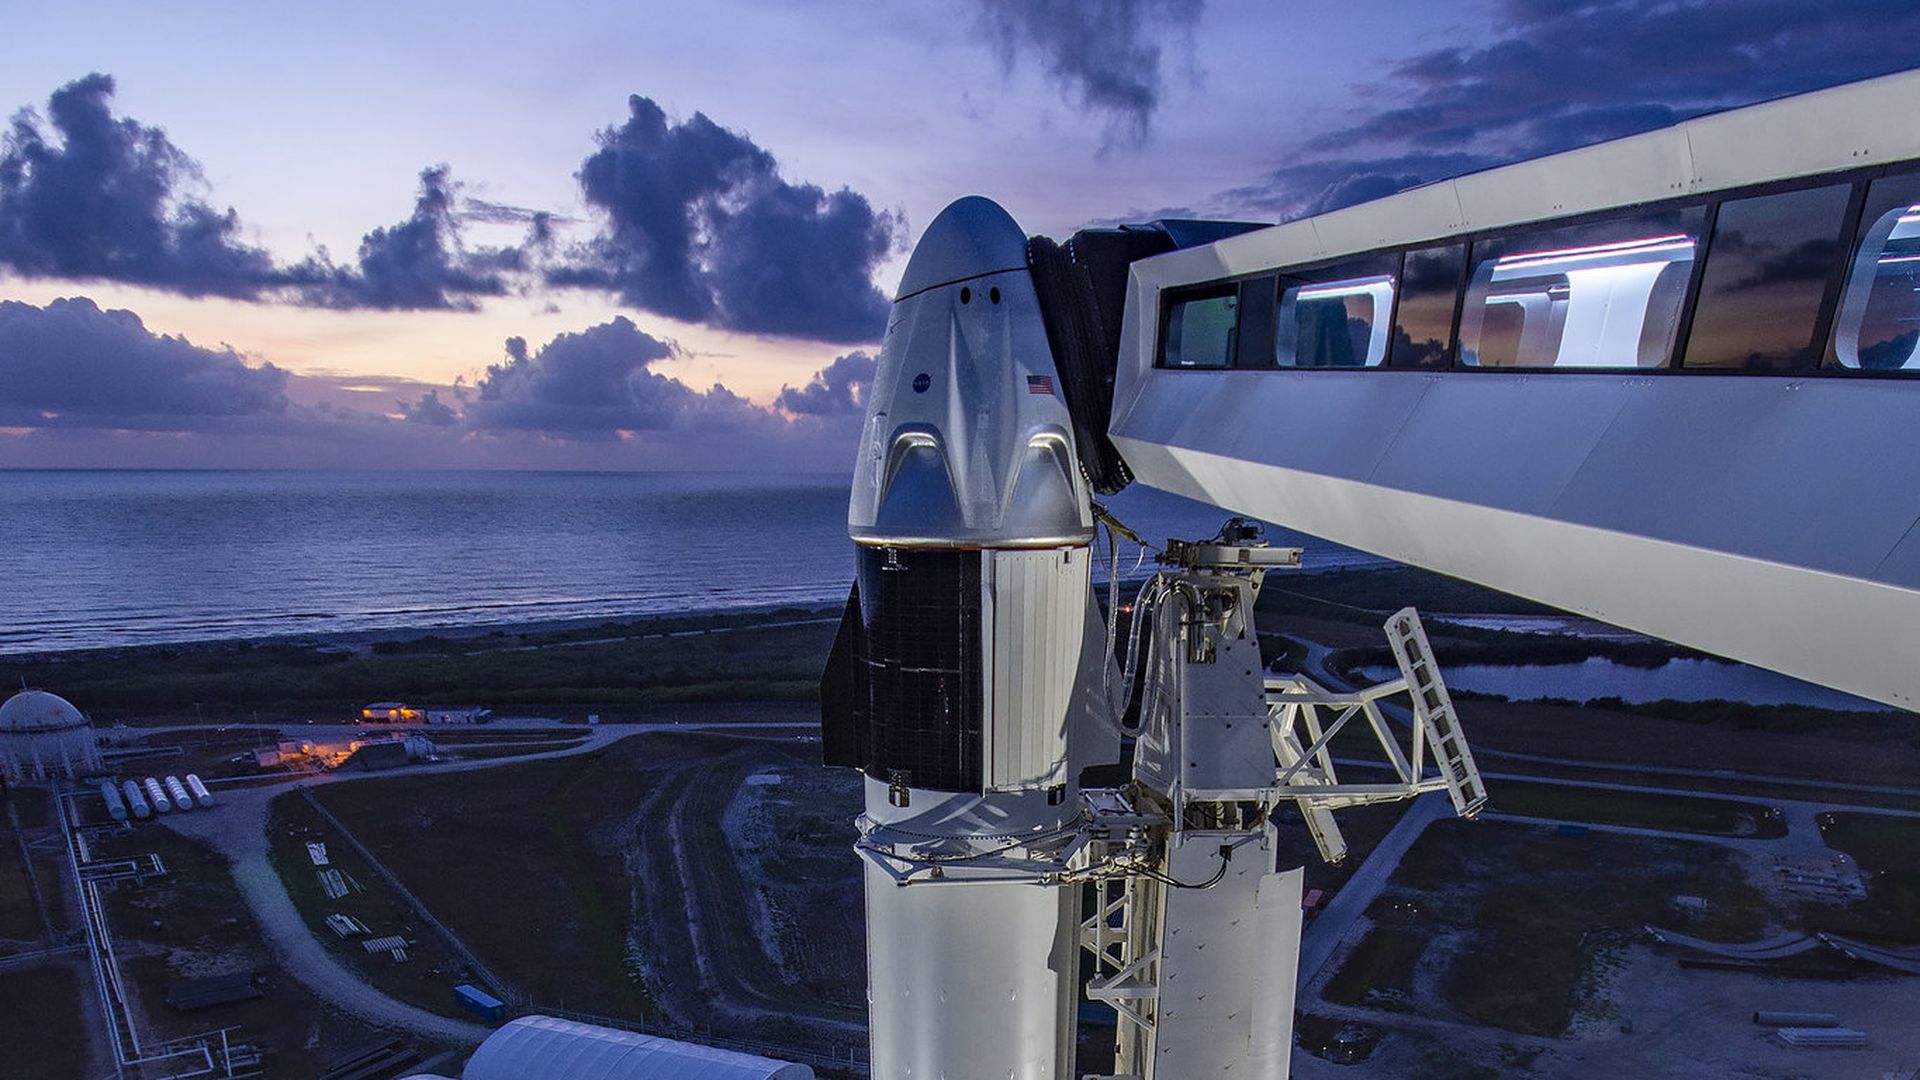 SpaceX's Crew Dragon stands atop a Falcon 9 rocket ahead of launch